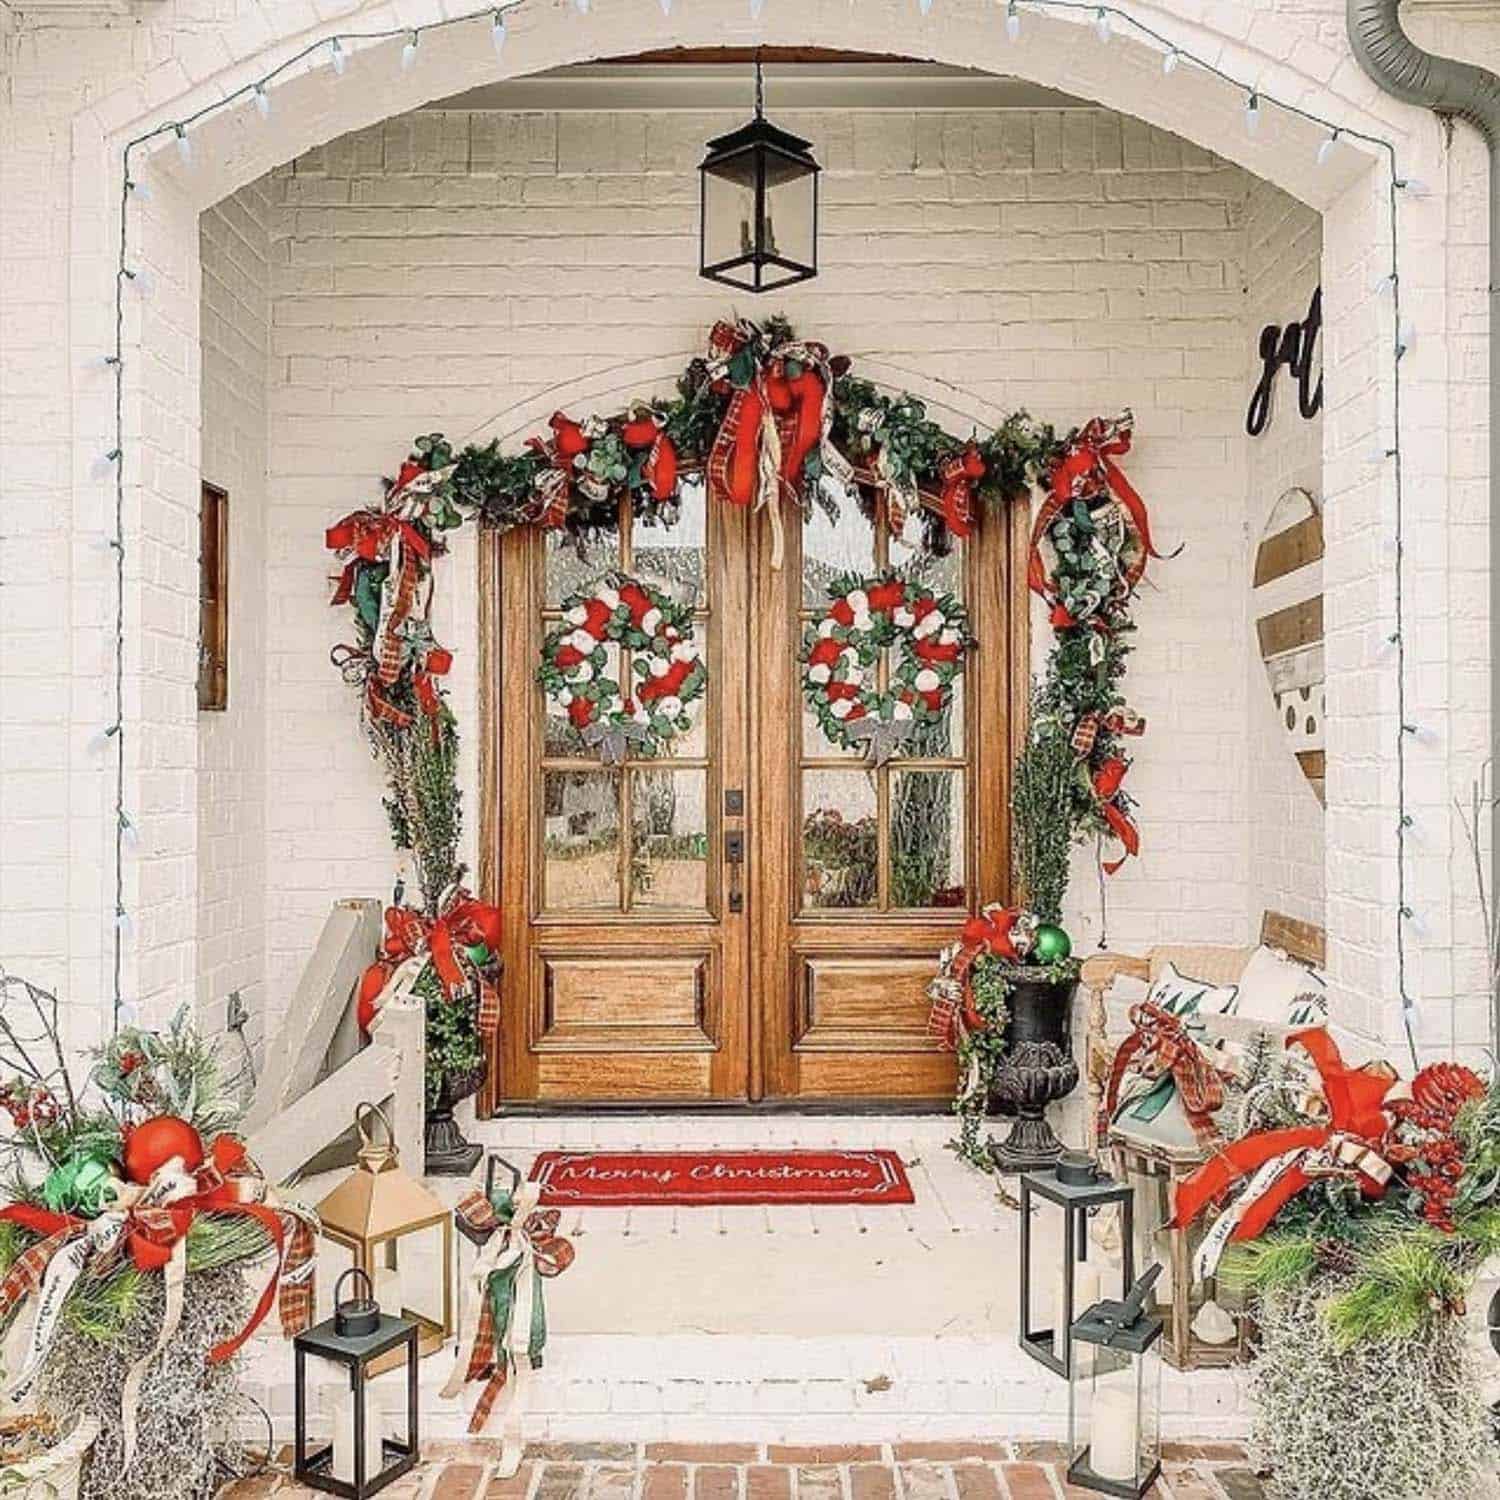 traditional red and green Christmas decorations on the front porch